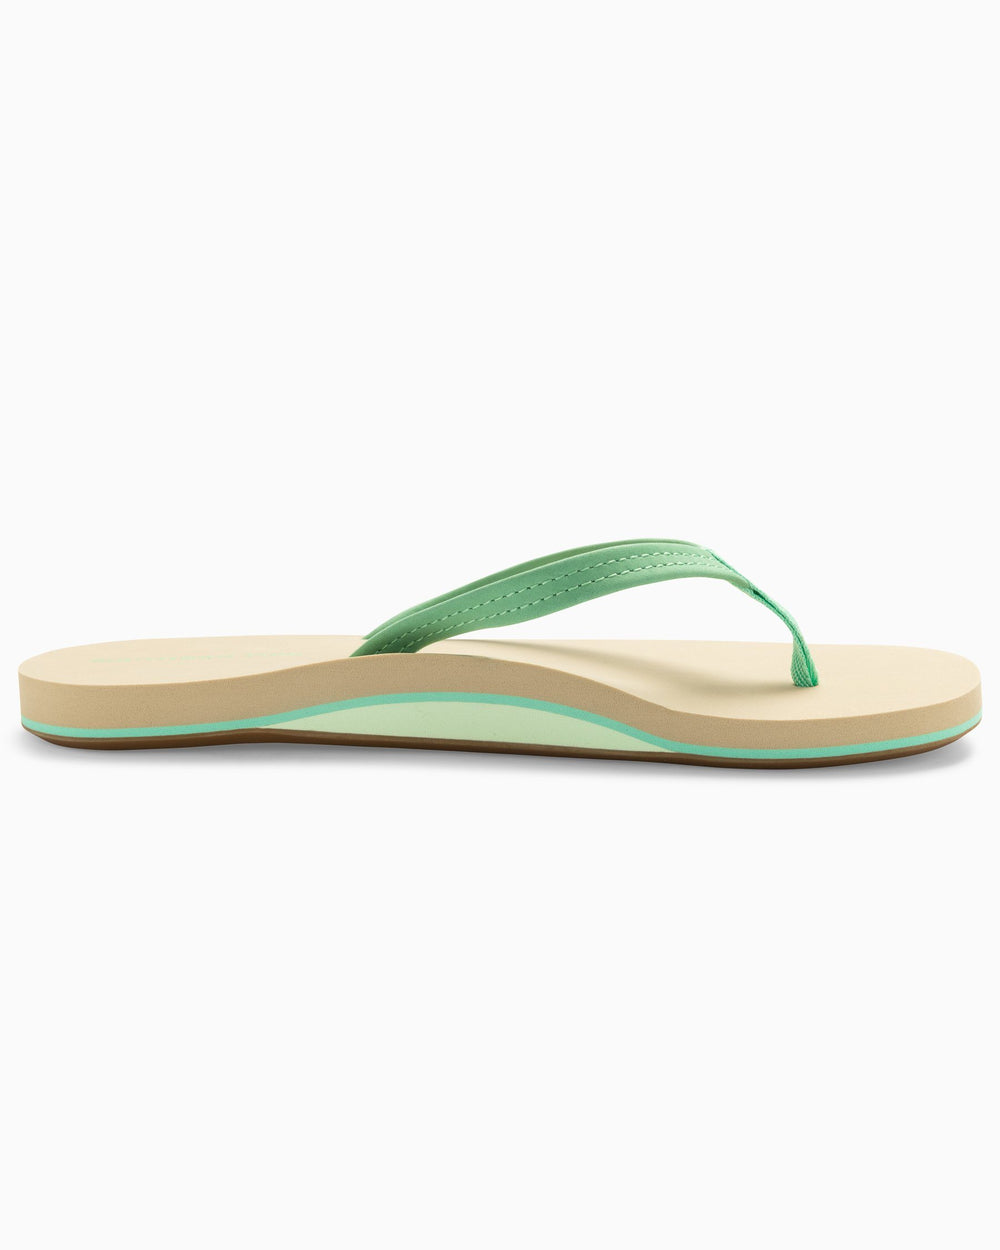 The side view of the Women's Weekend Starboard Leather by Southern Tide - Starboard Green